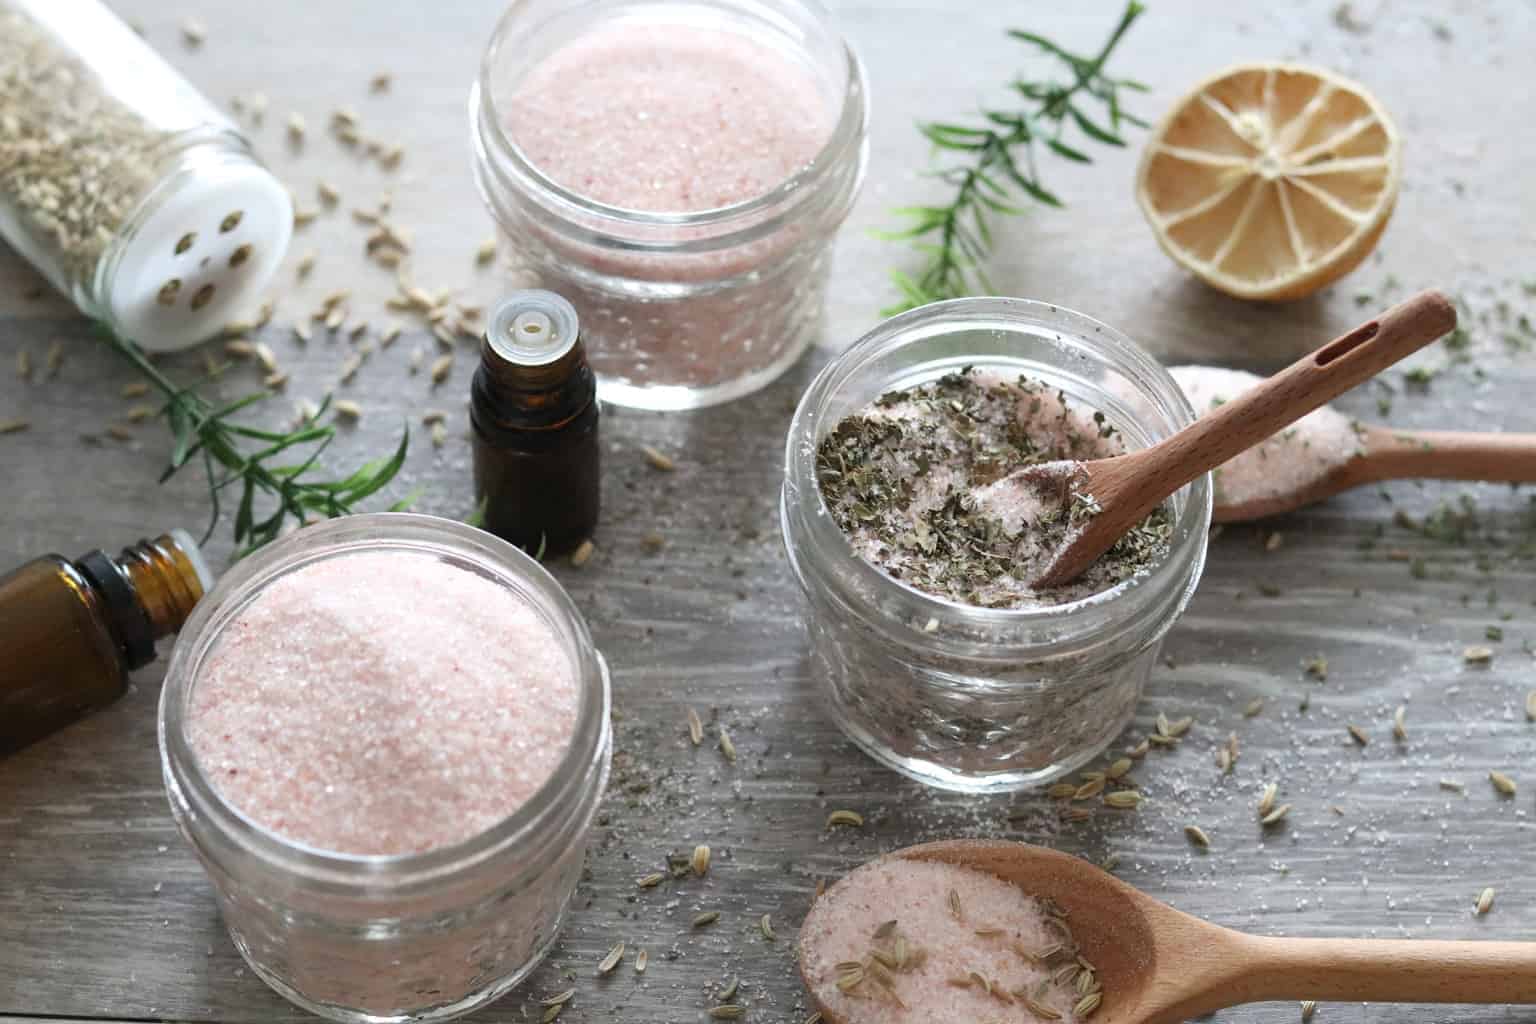 Oil infused seasoning salts in small mason jars on table with oil bottles, and wooden spoons.